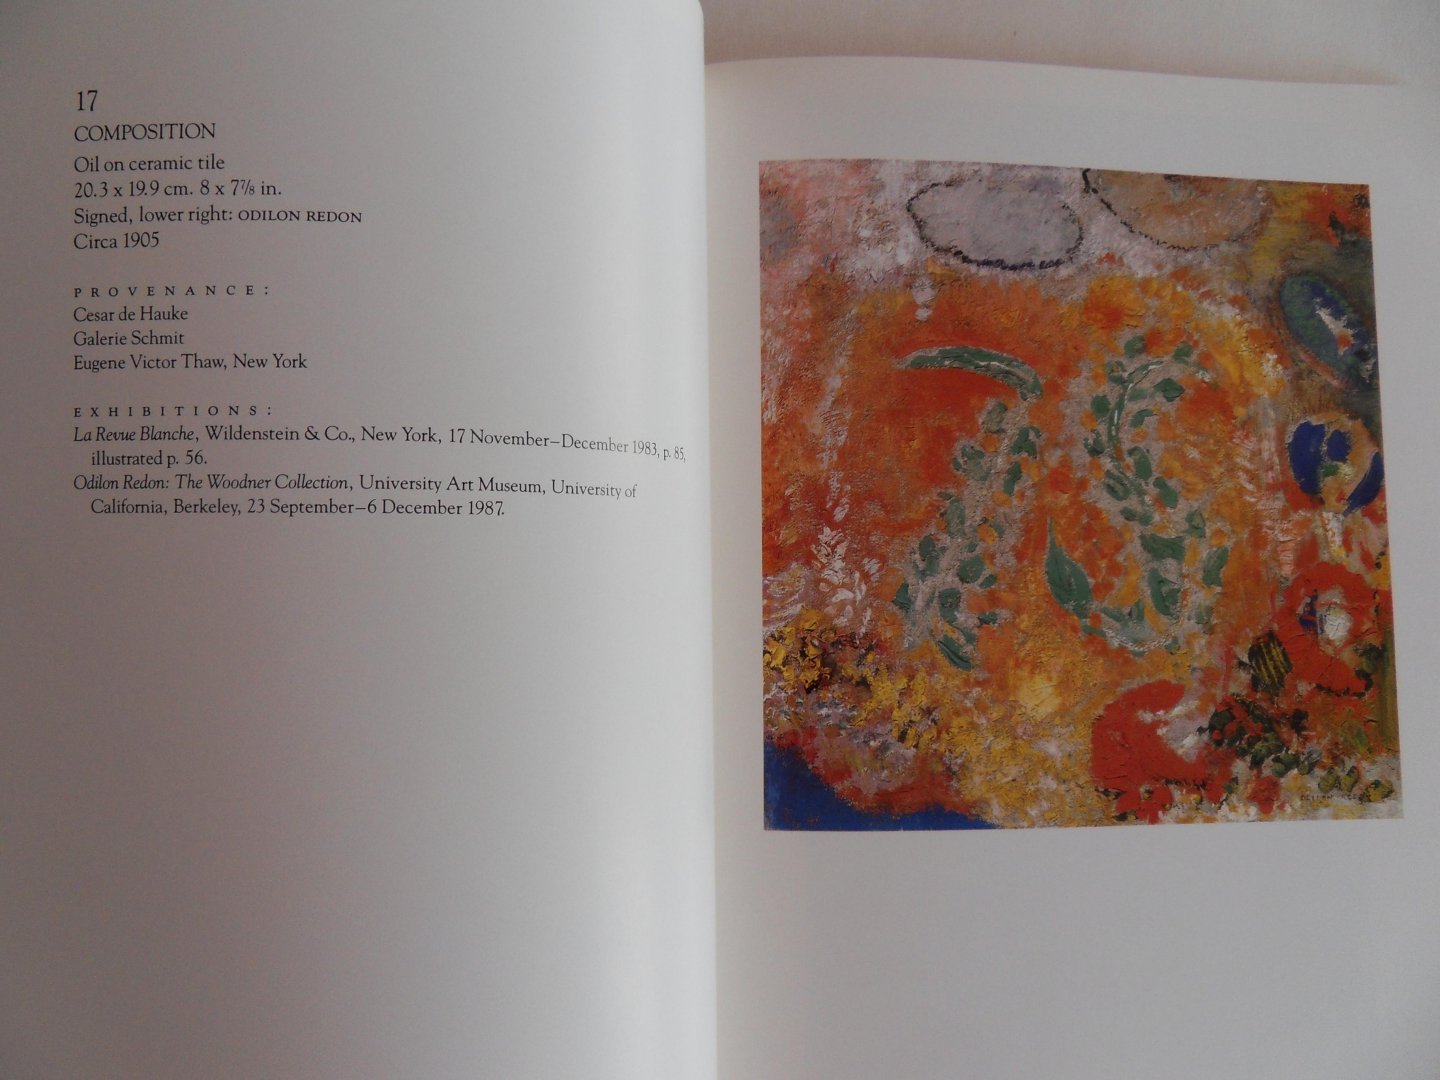 Gowing, Lawrence (introduction). - Odilon Redon. - The Woodner Collection.